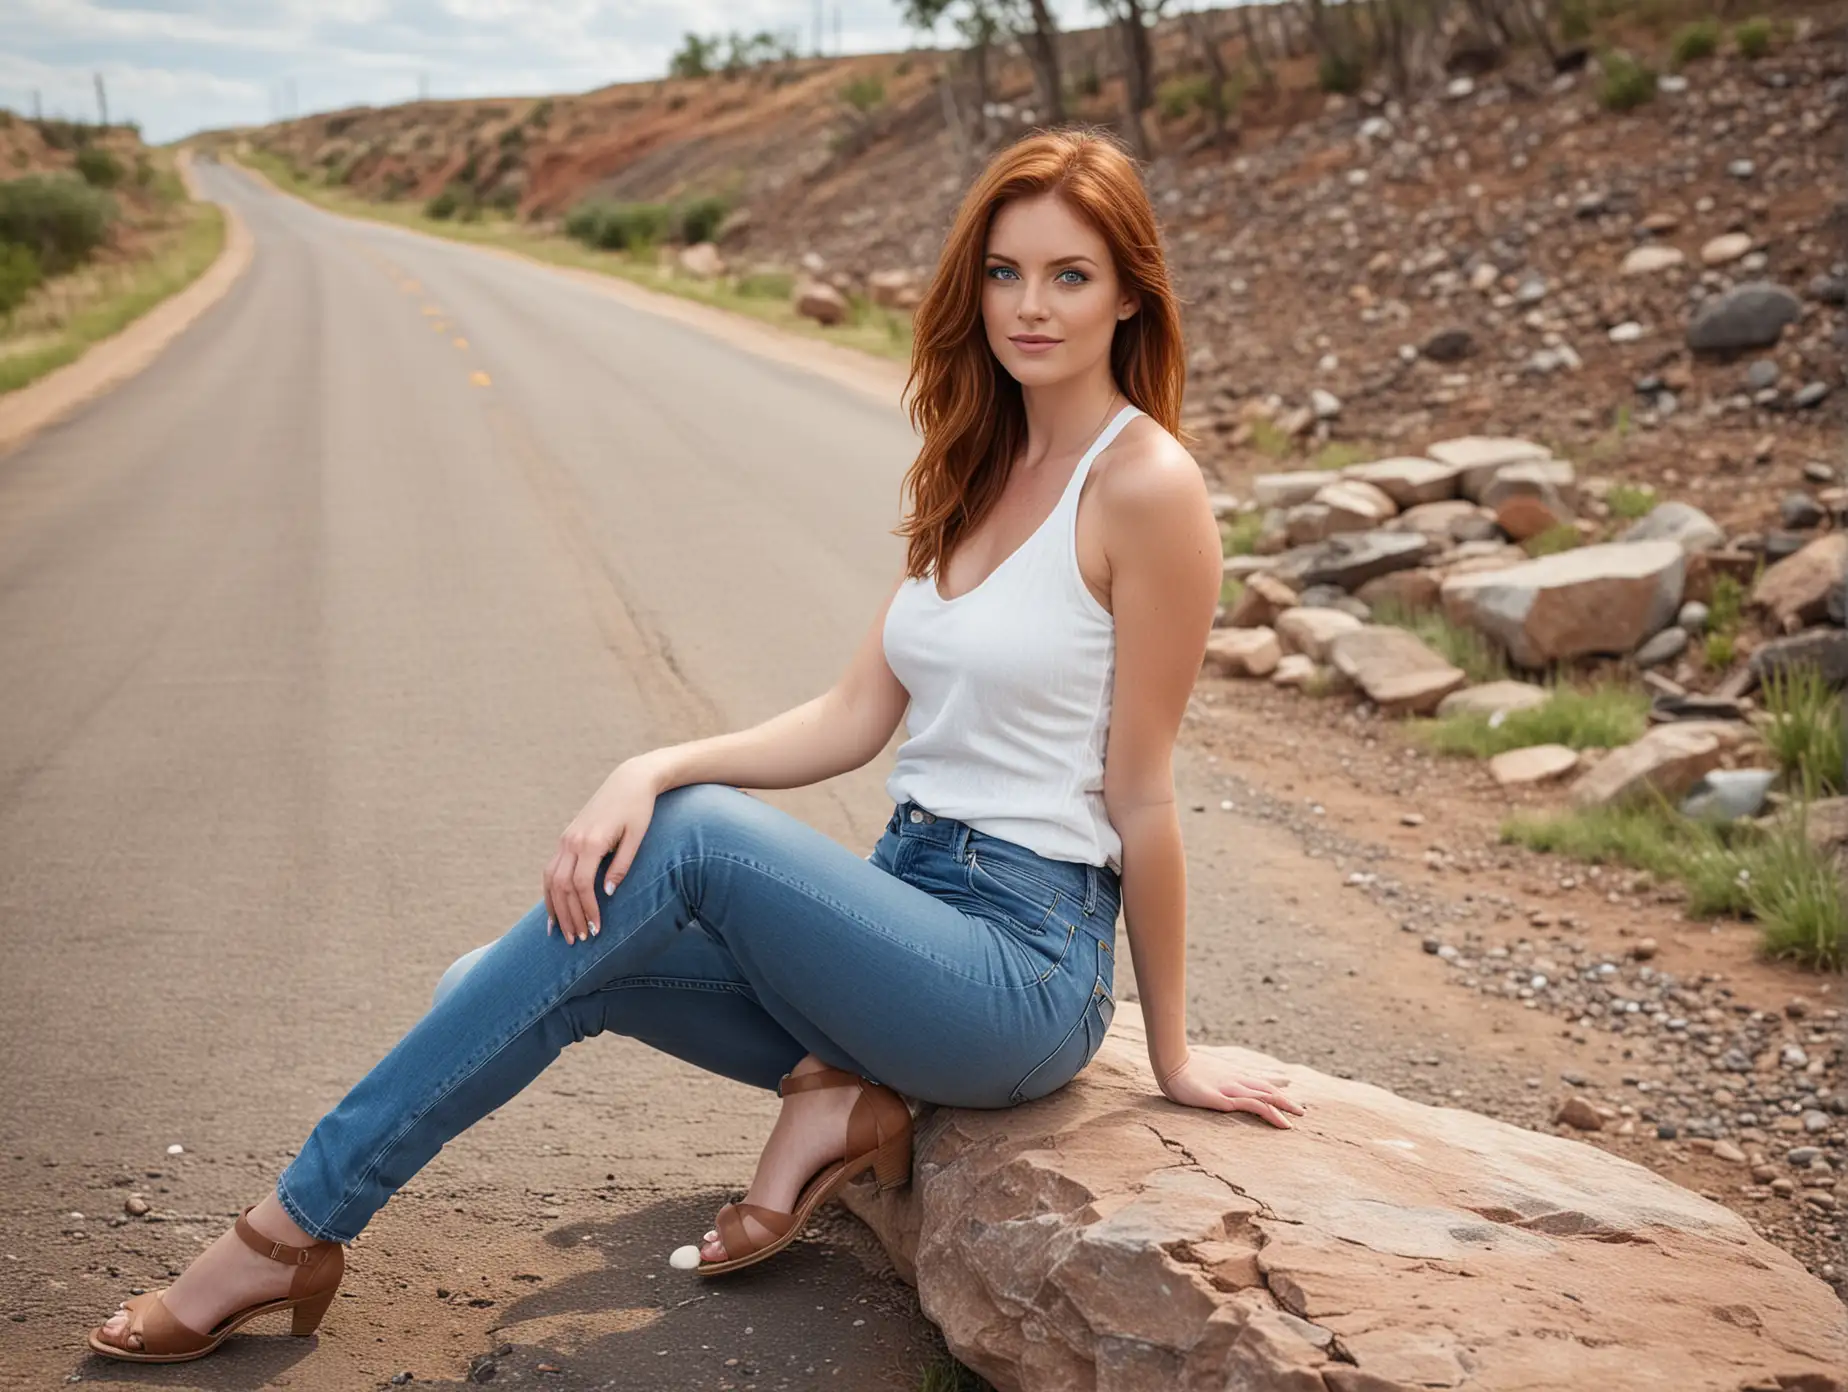 29 year old woman,auburn hair ,blue eyes,jeans,halter top,sitting on rock,near country road ,full figure,low heeled shoes,road in background